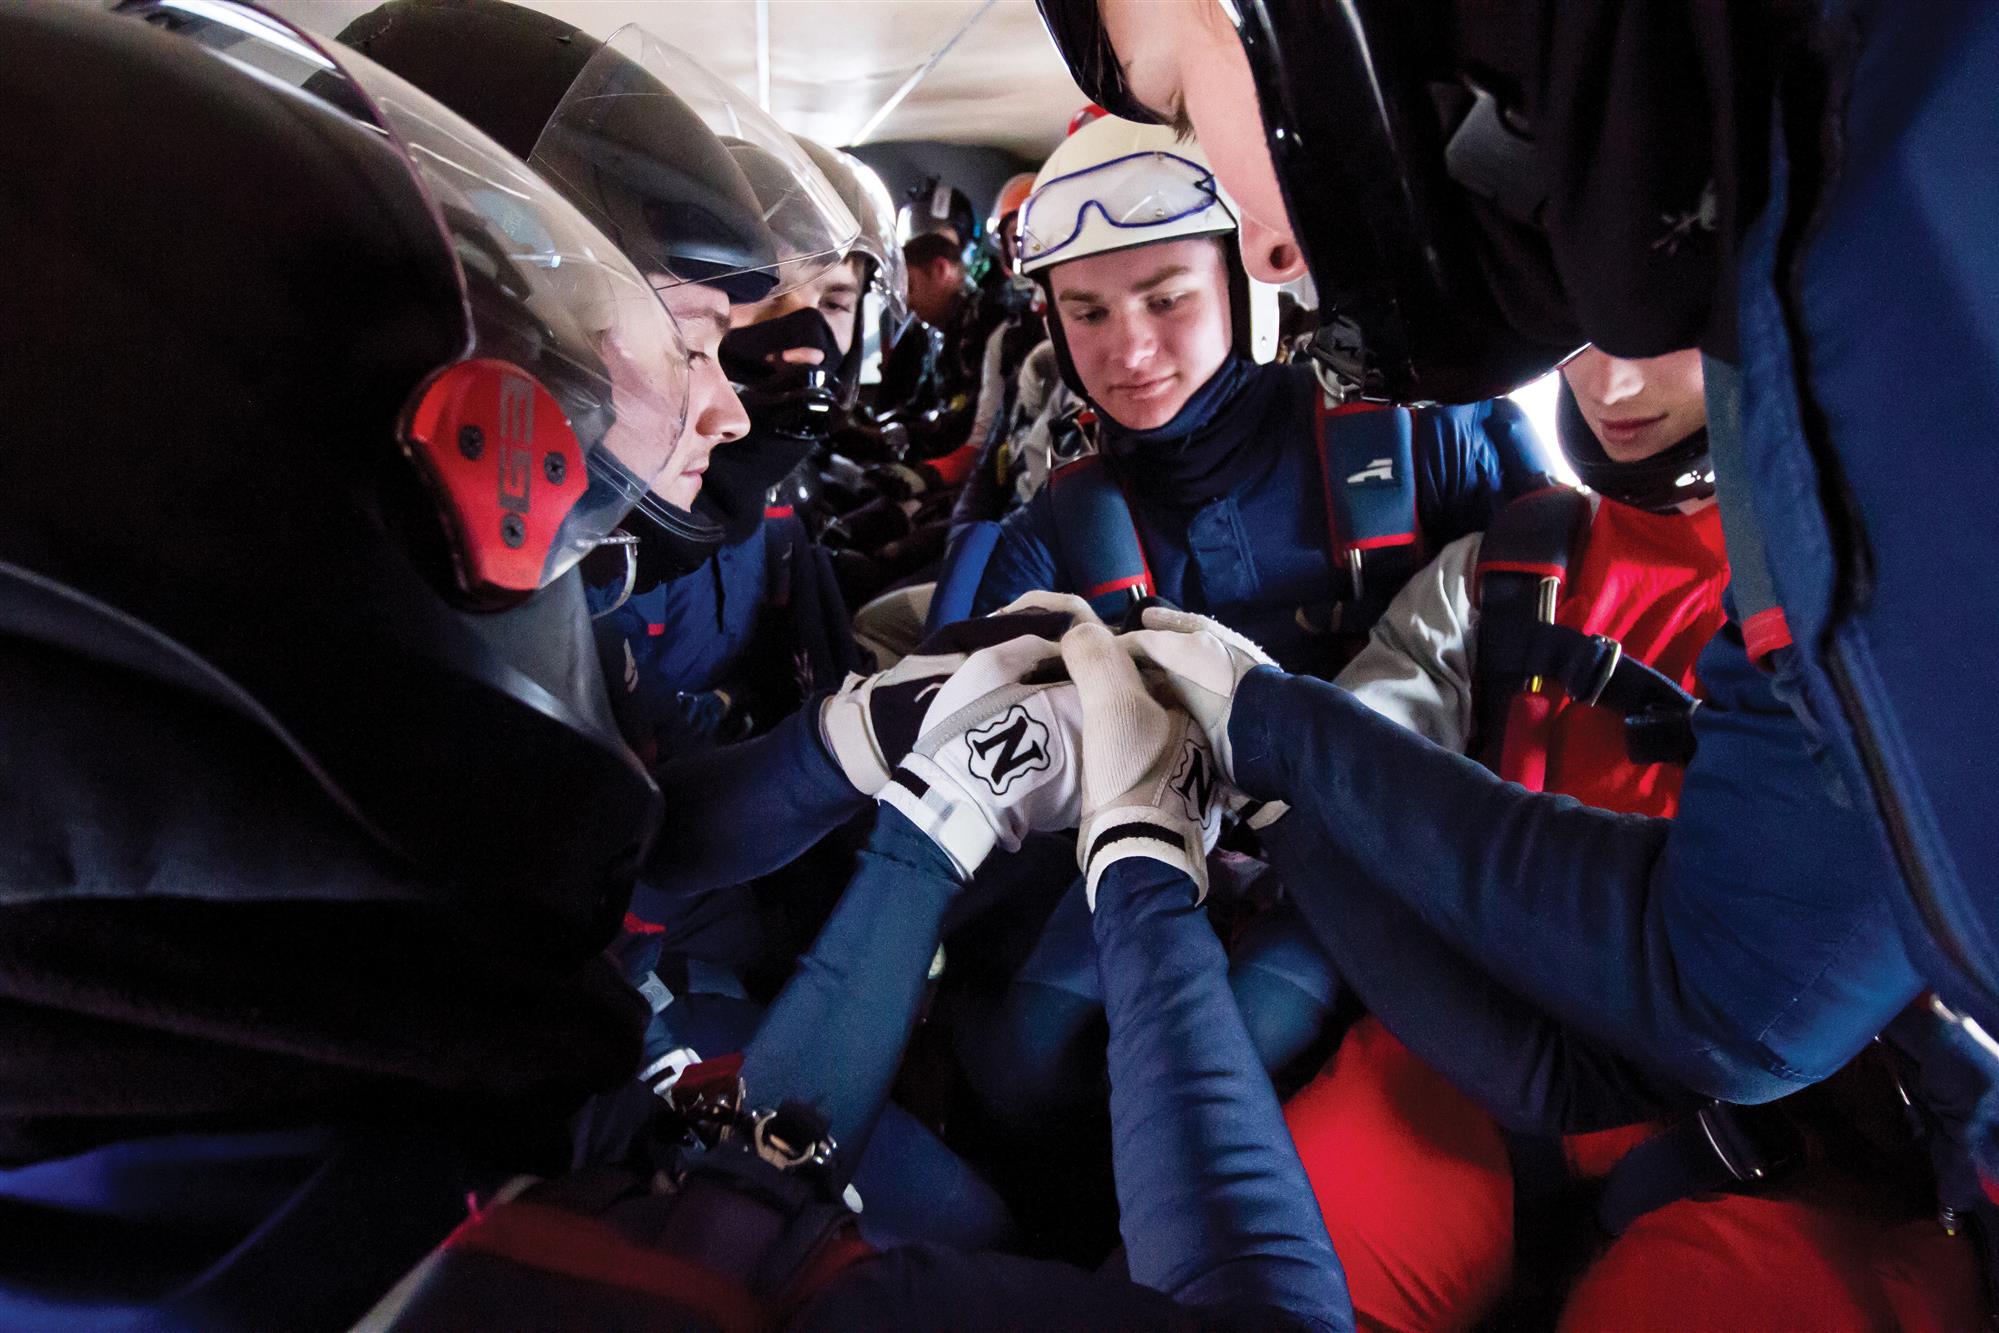 College Skydiving Clubs: How and Why to Start One